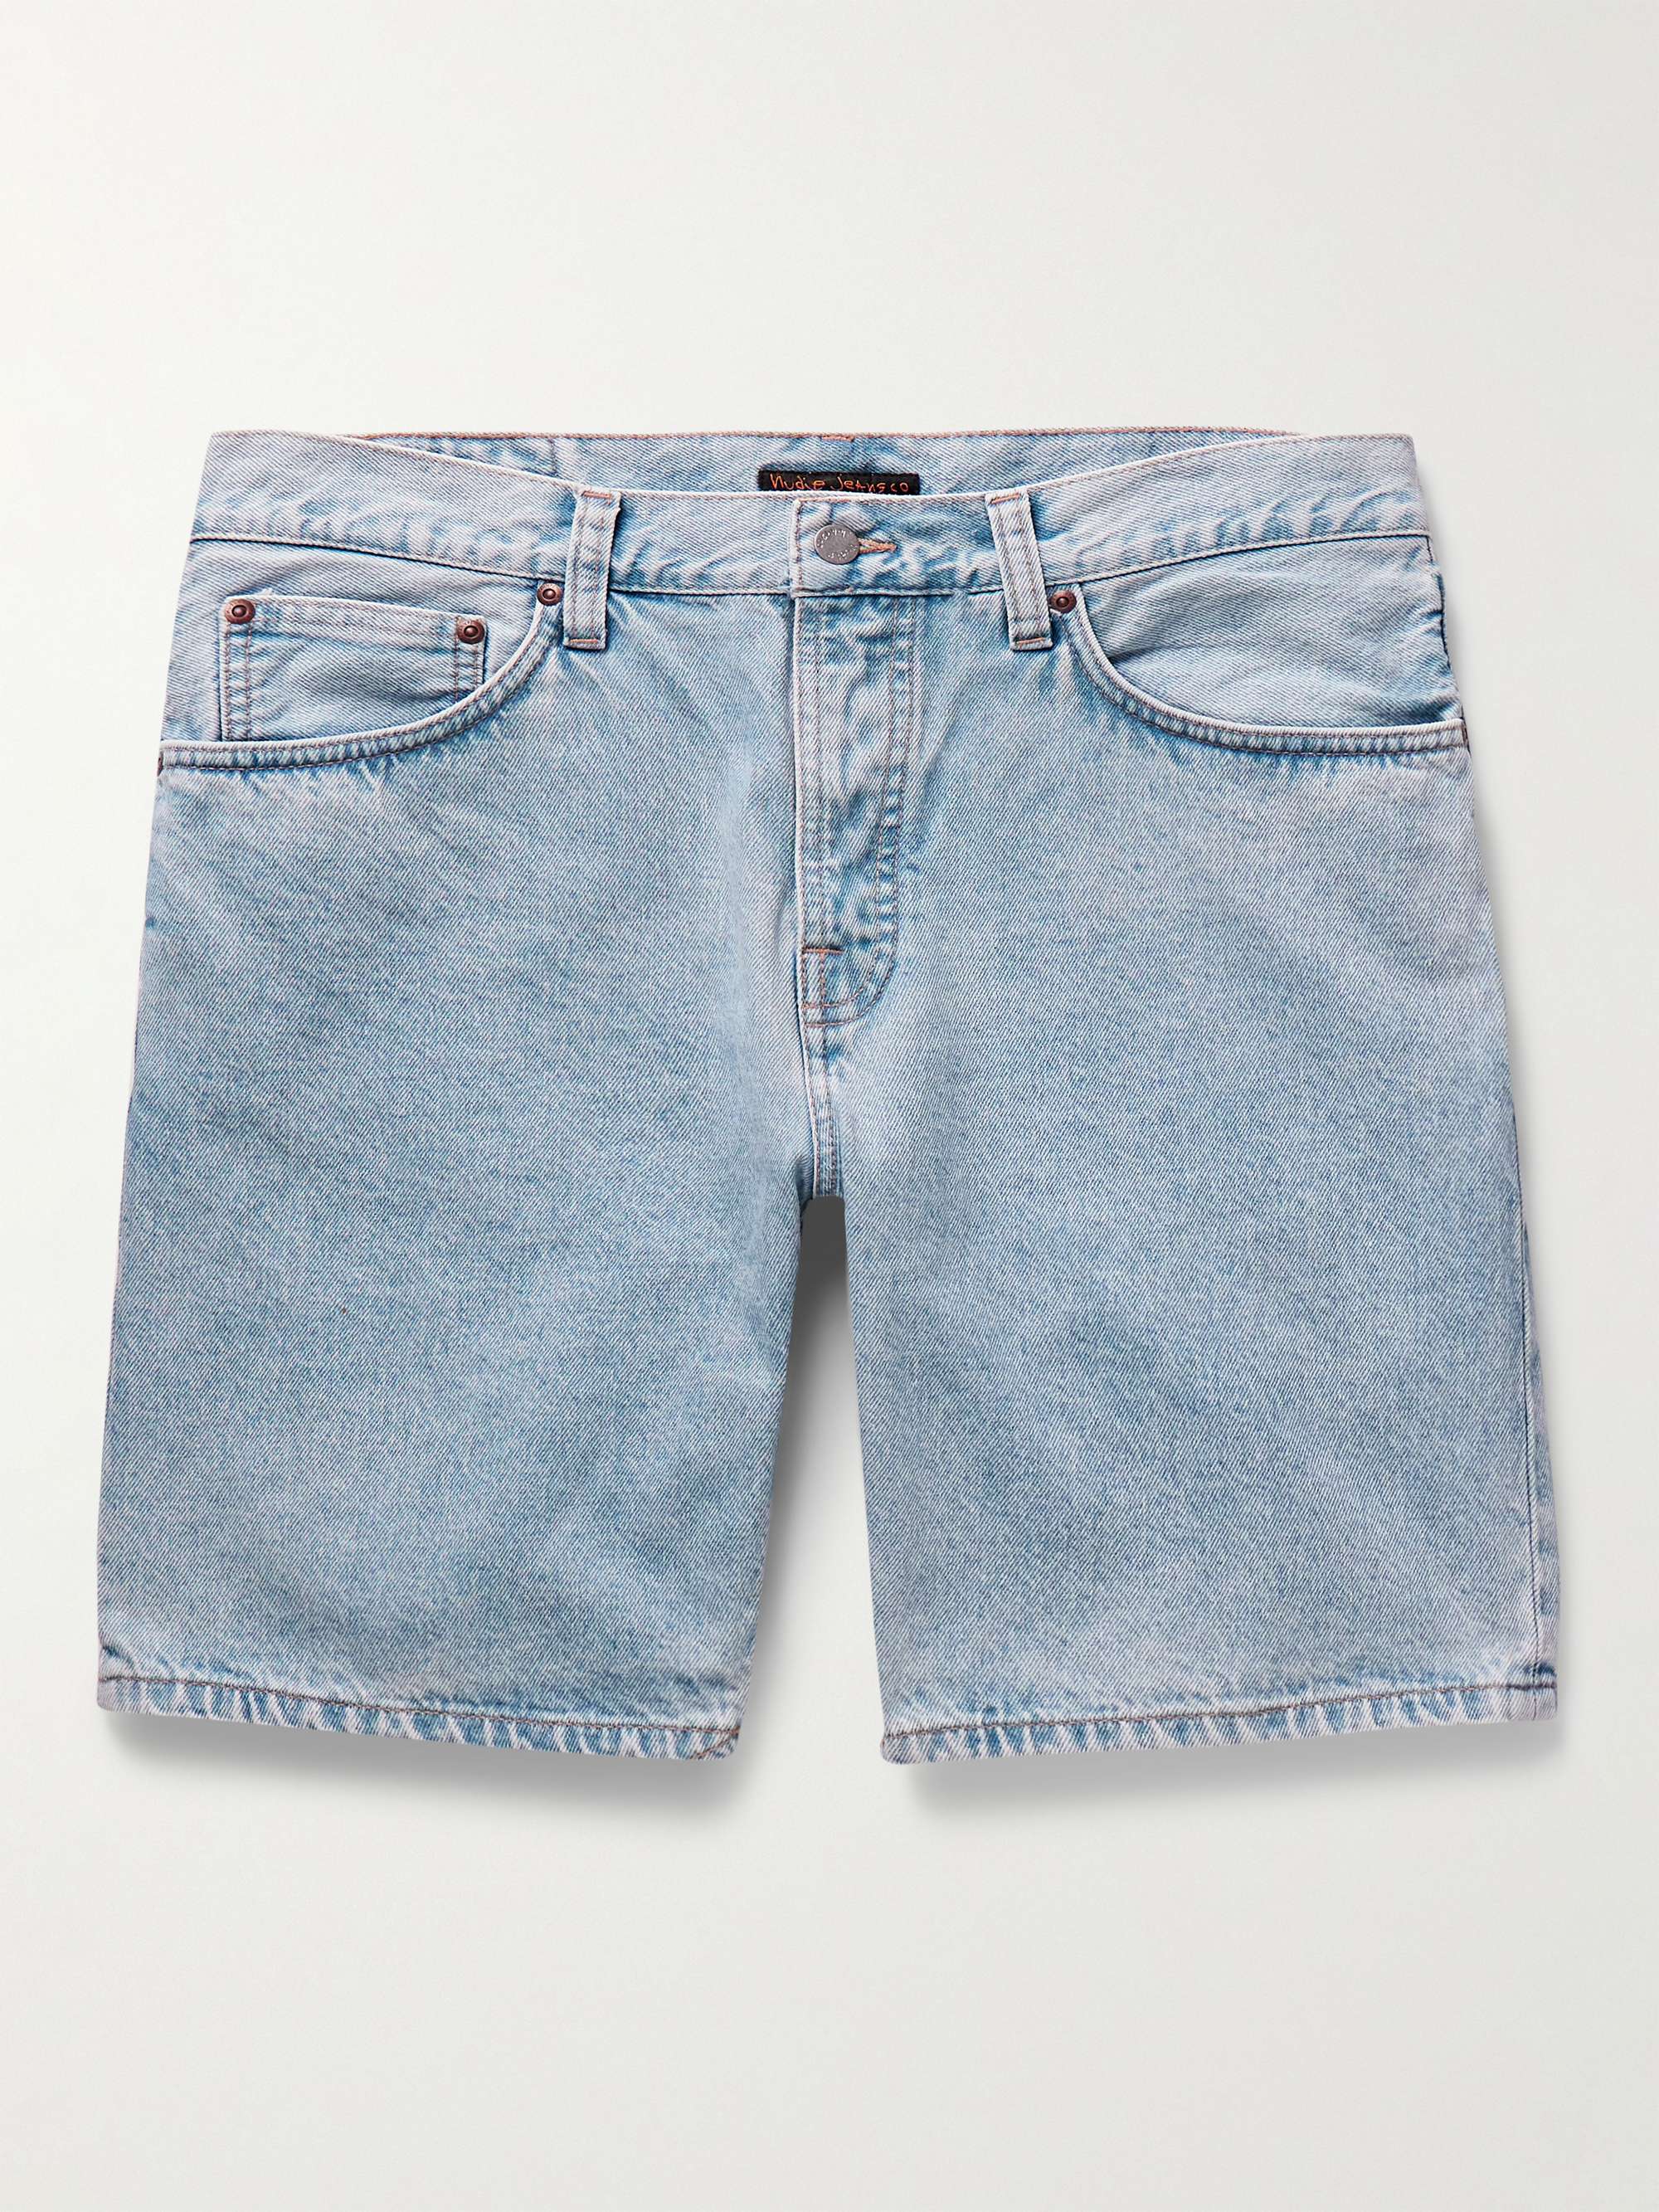 HiLY Men's Stretch Ripped Denim Shorts Casual India | Ubuy